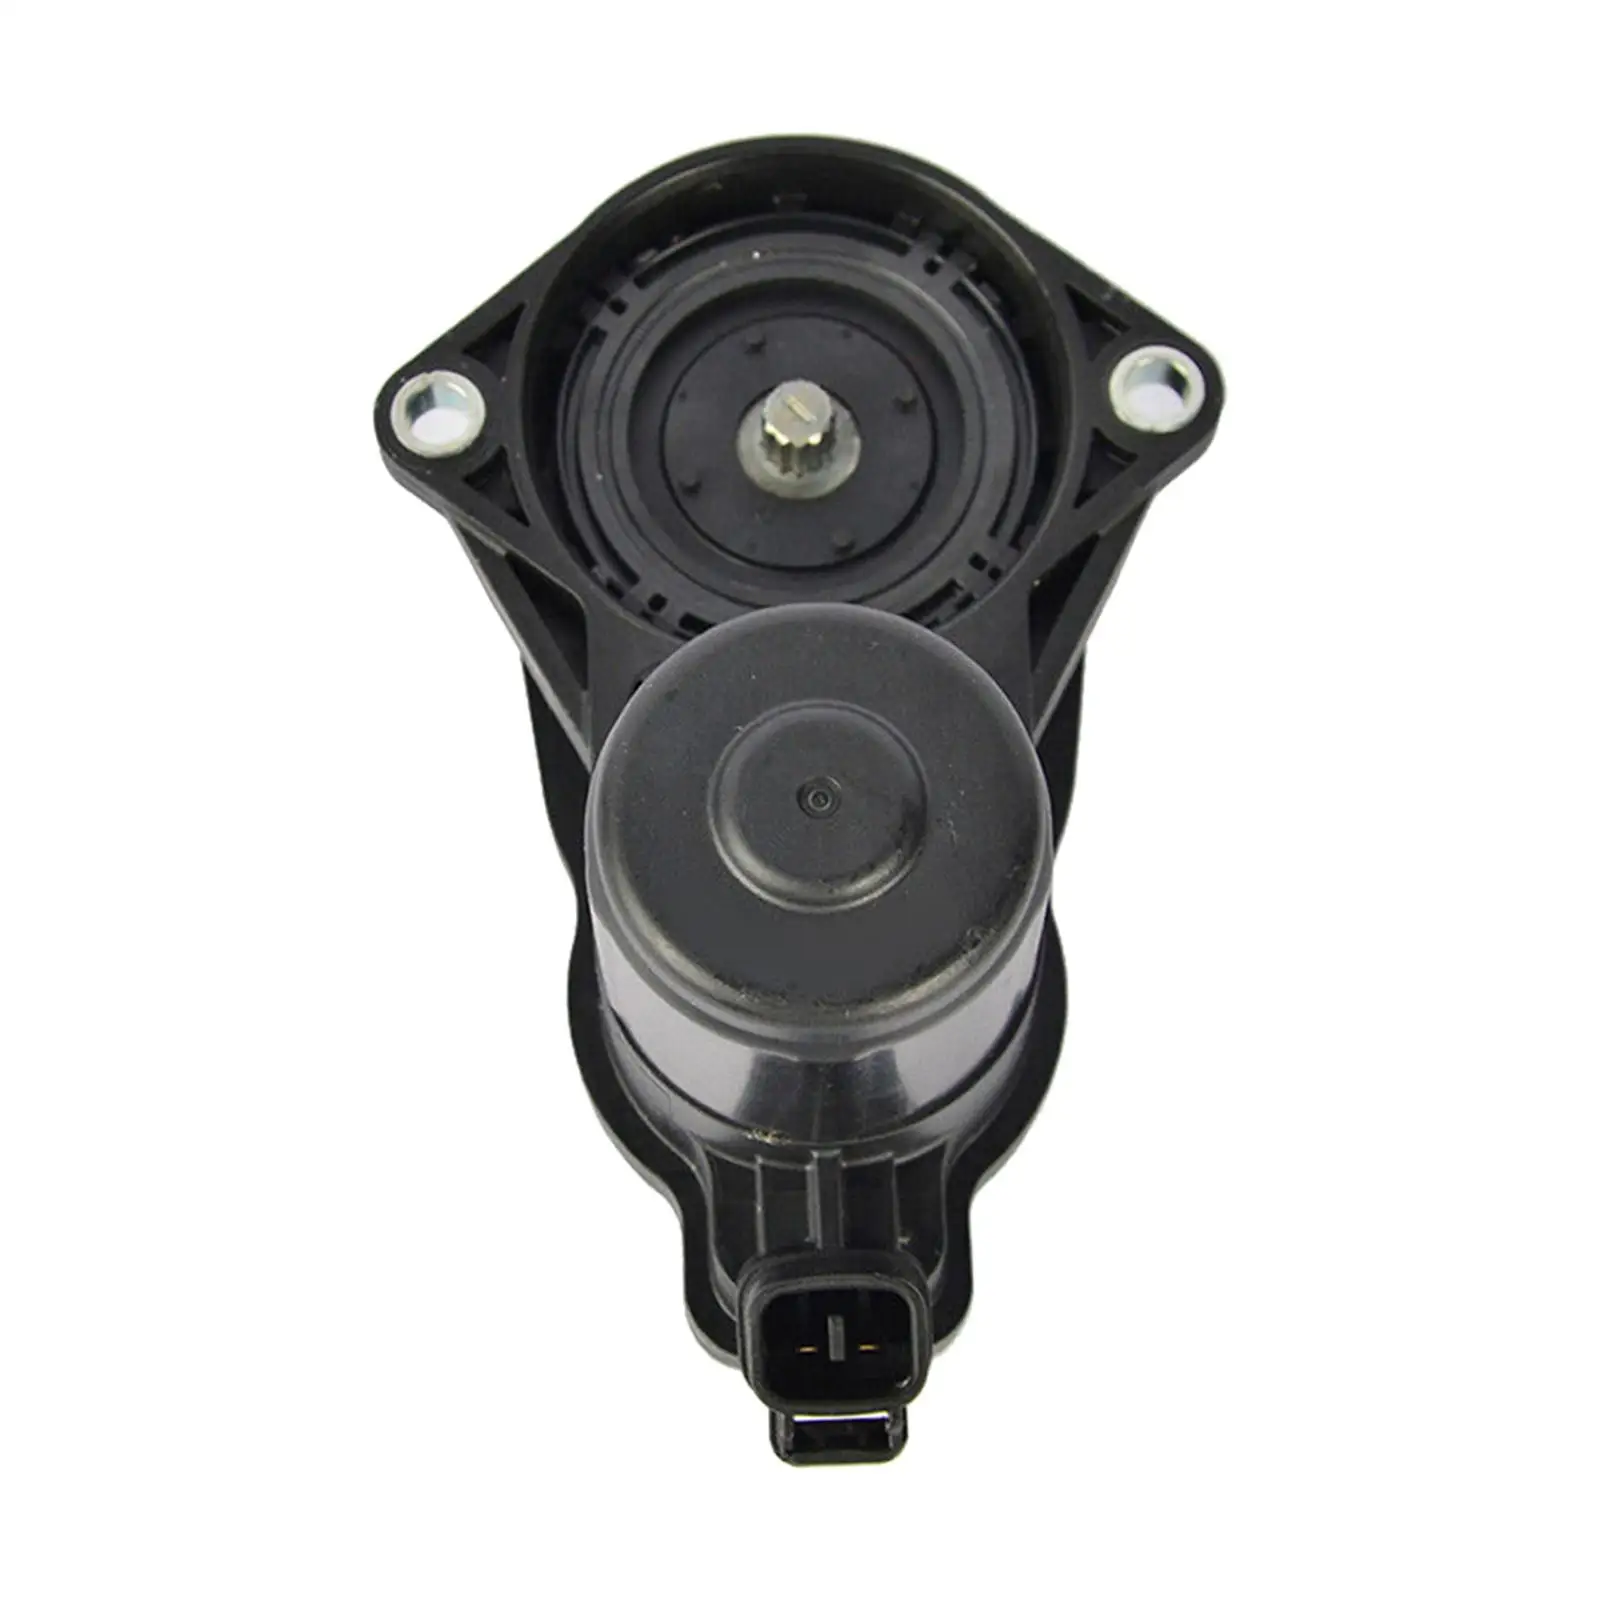 Parking Brake Actuator Assembly Automotive Replacement Part for Toyota Corolla Hatchback Corolla Sedan Venza Easy to Mount